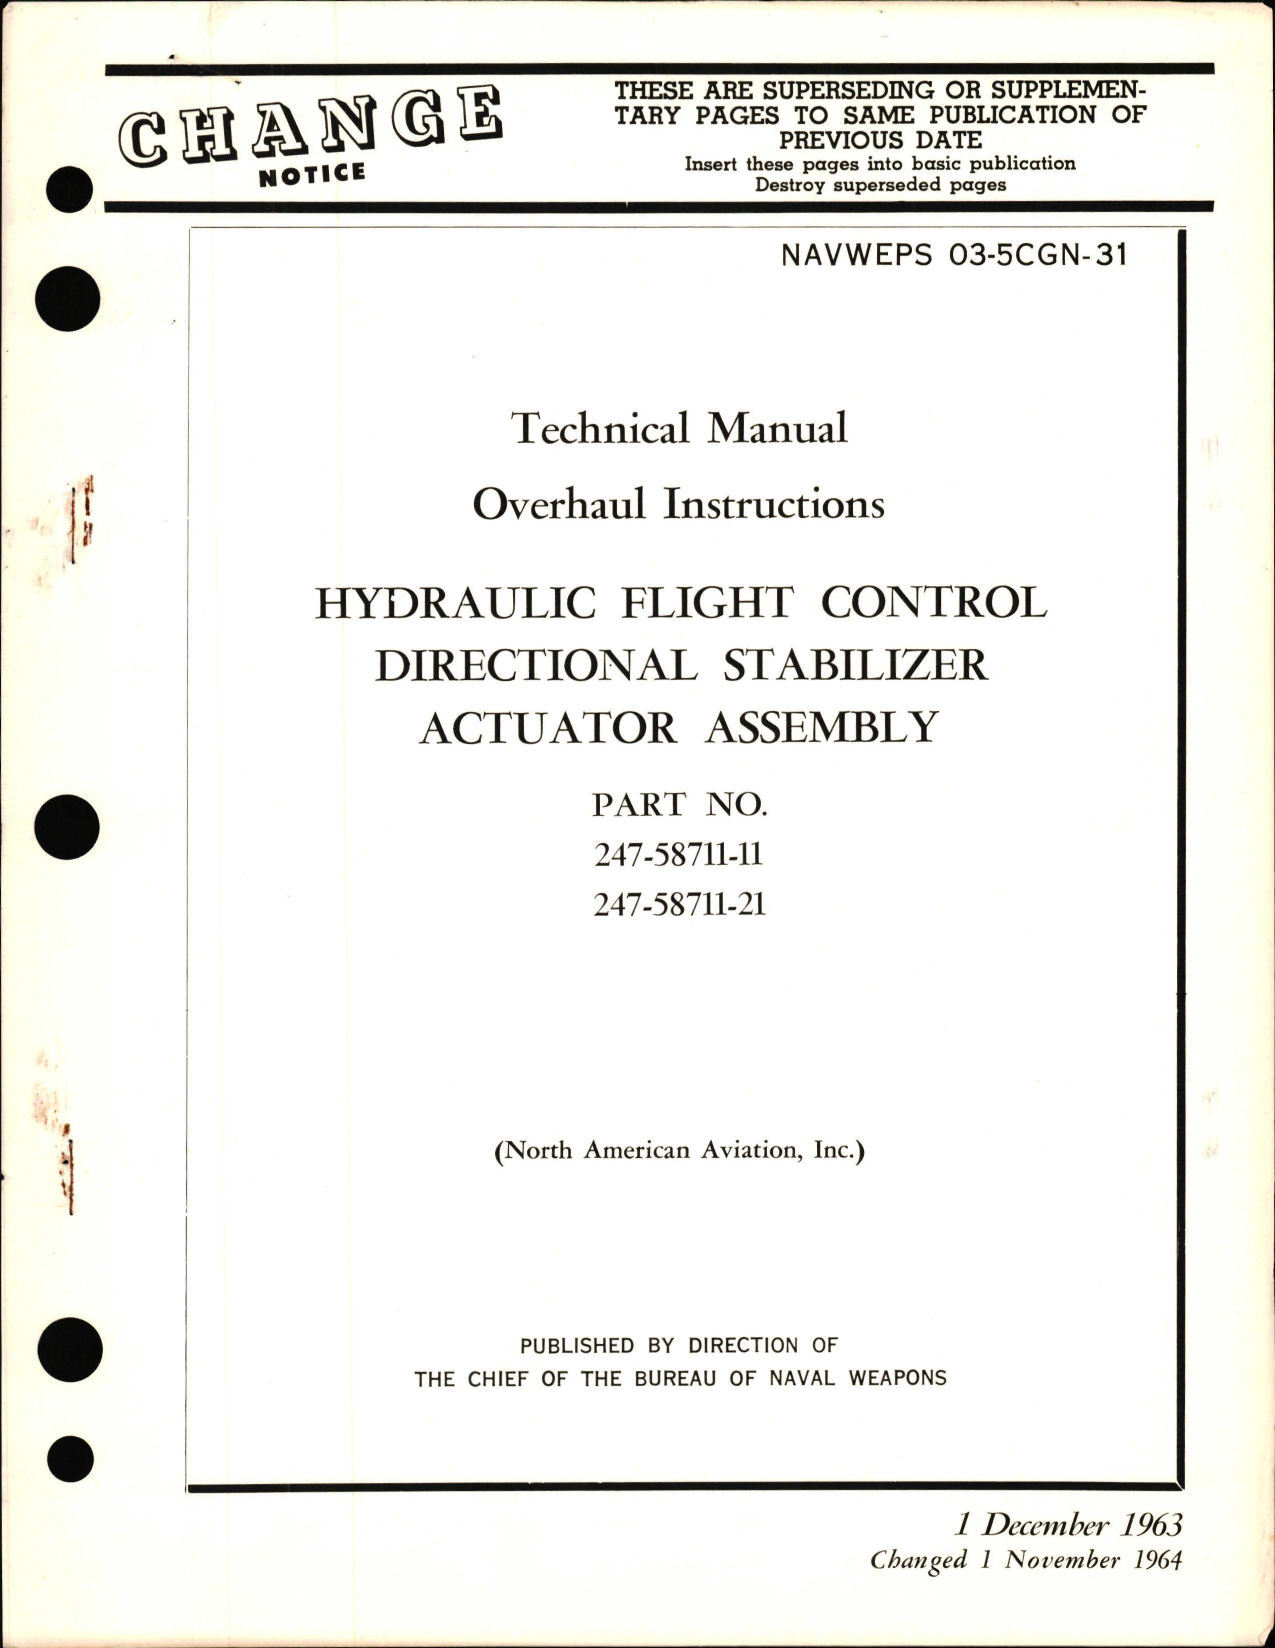 Sample page 1 from AirCorps Library document: Overhaul Instructions for Hydraulic Flight Control, Directional Stabilizer Actuator Assembly - Part 247-58711-11 and 247-58711-21 